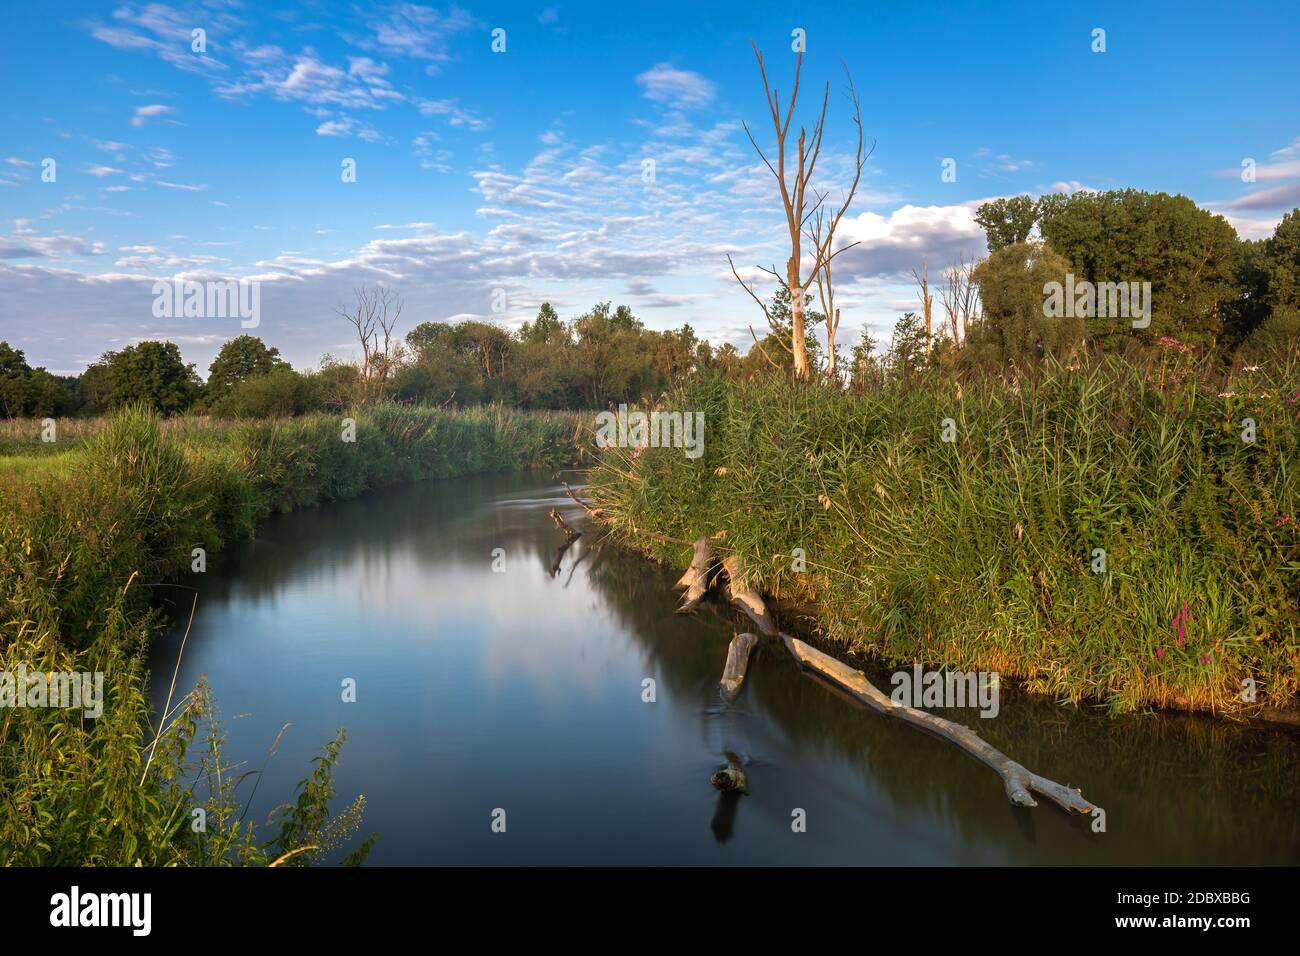 Dead trees on the bank of Paar river in Bavaria, Germany Stock Photo